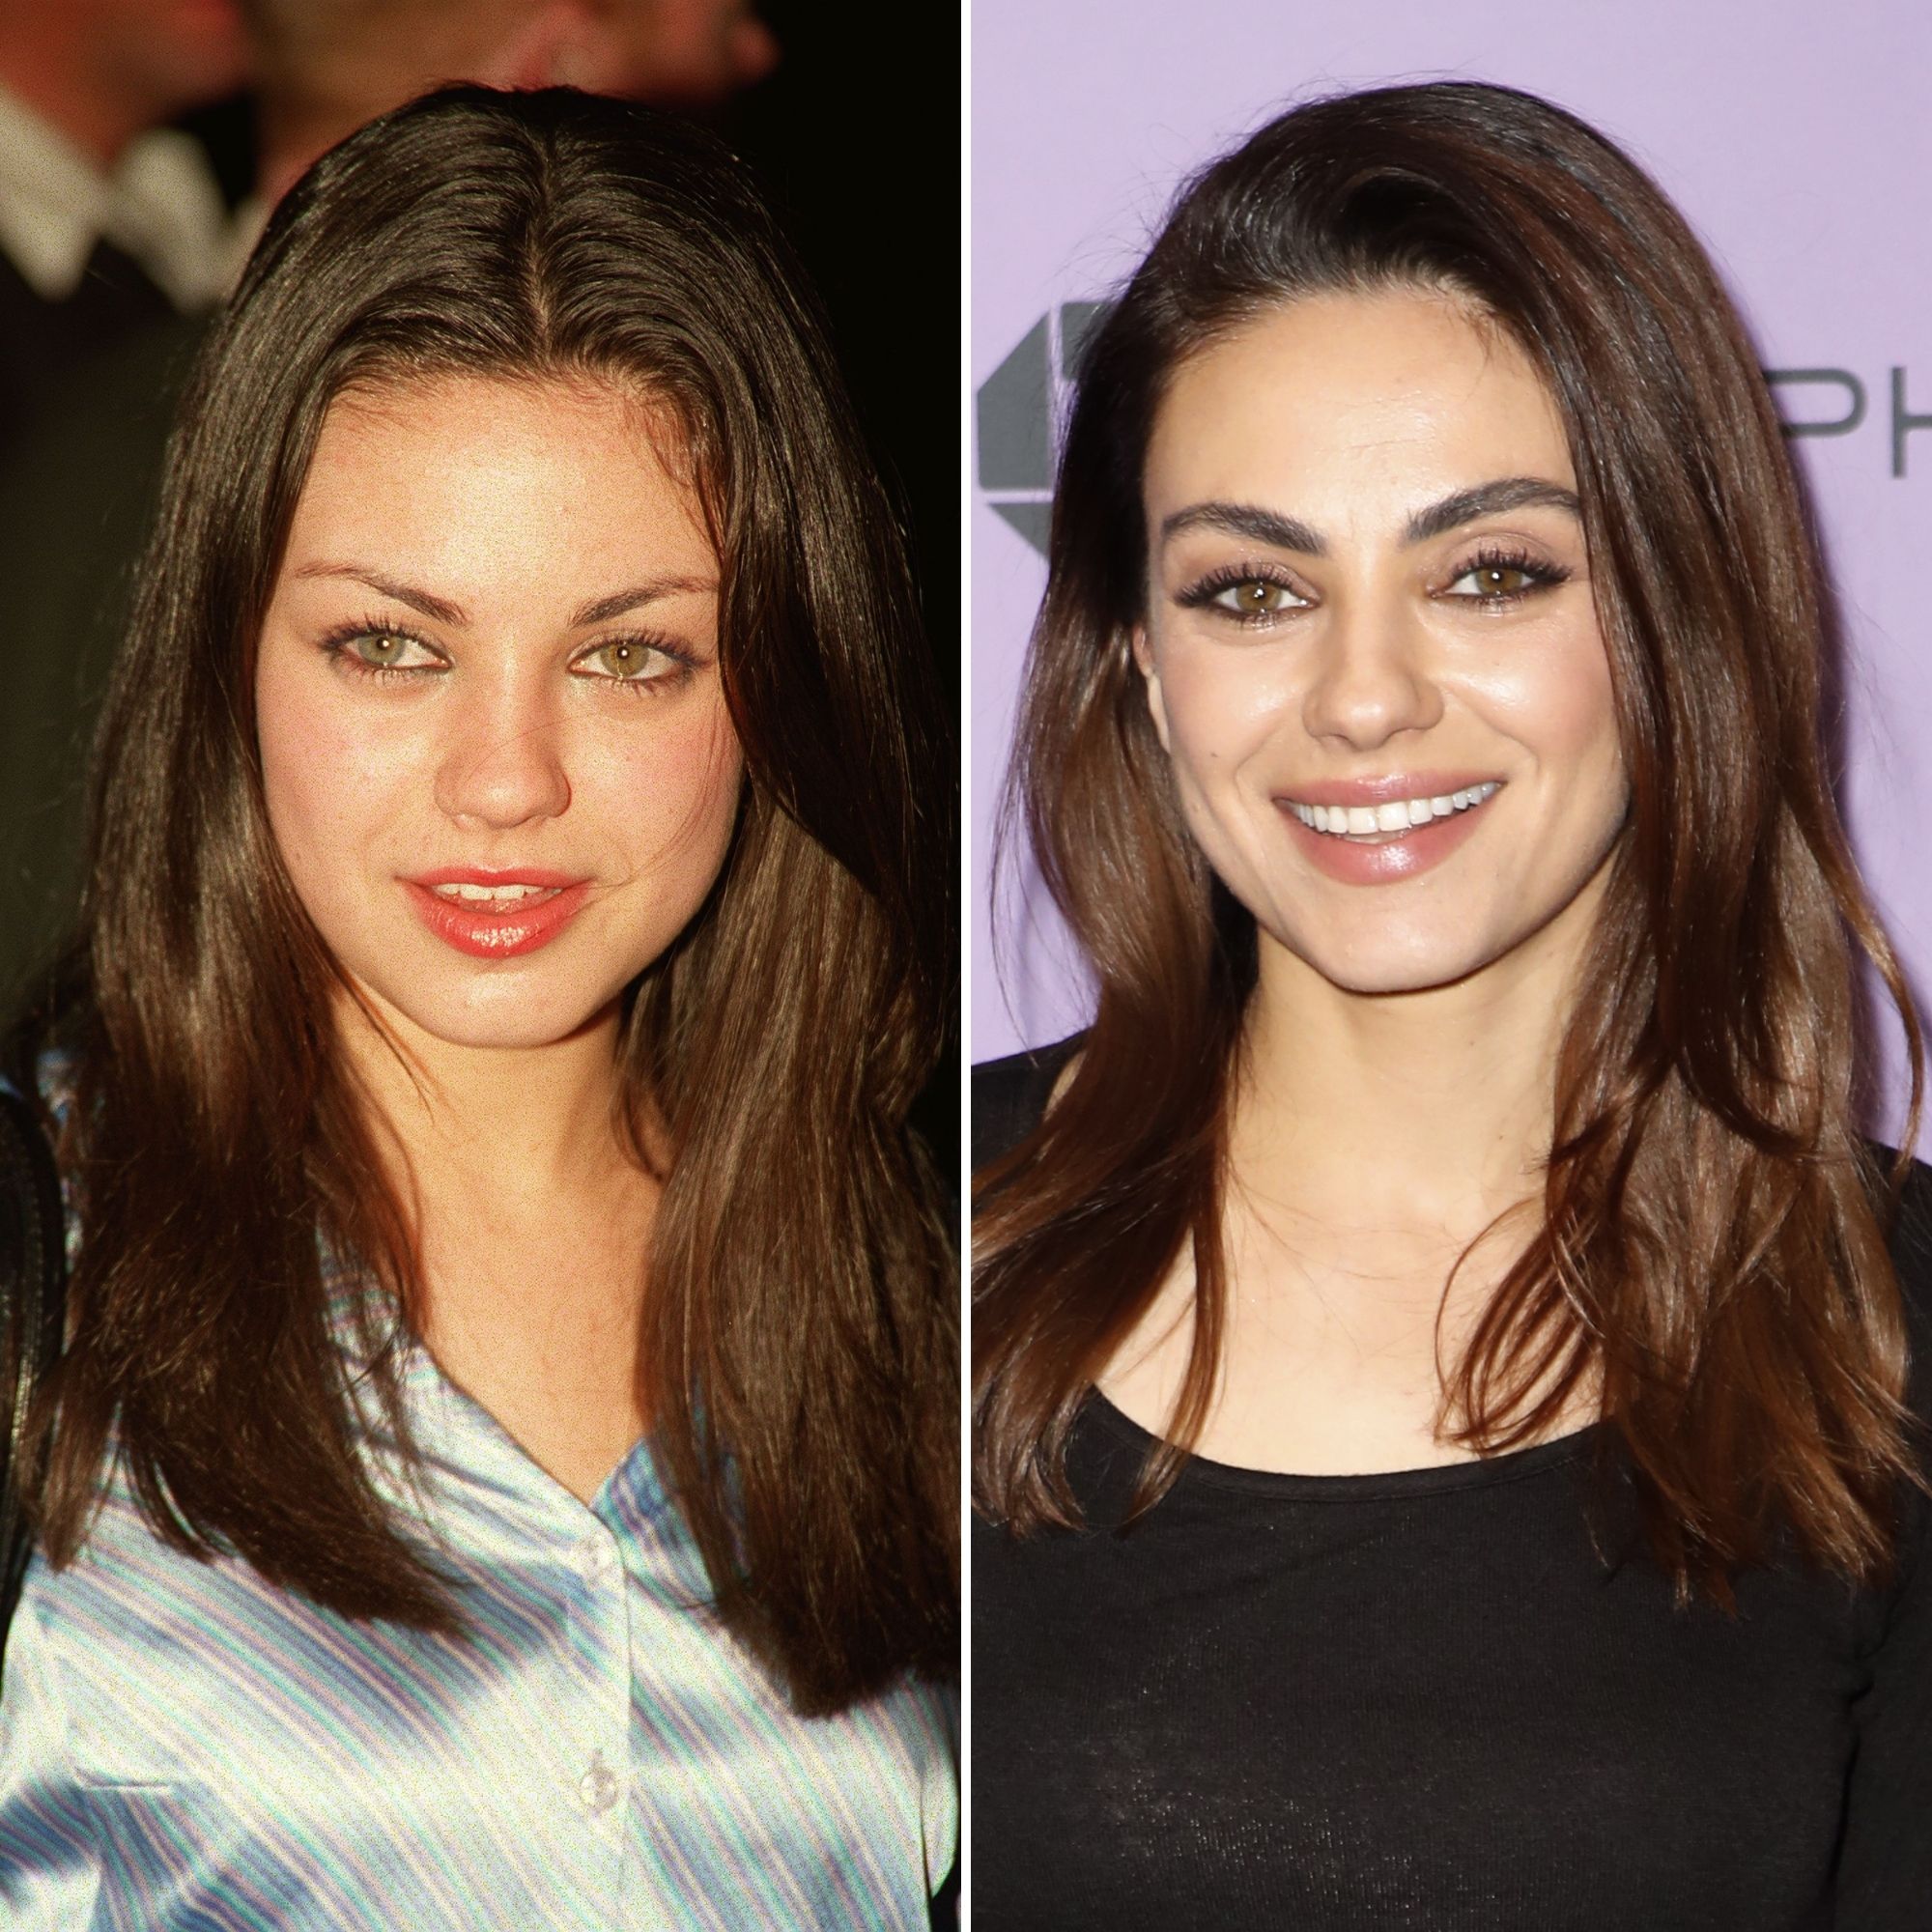 Did Mila Kunis Get Plastic Surgery? Then and Now Photos